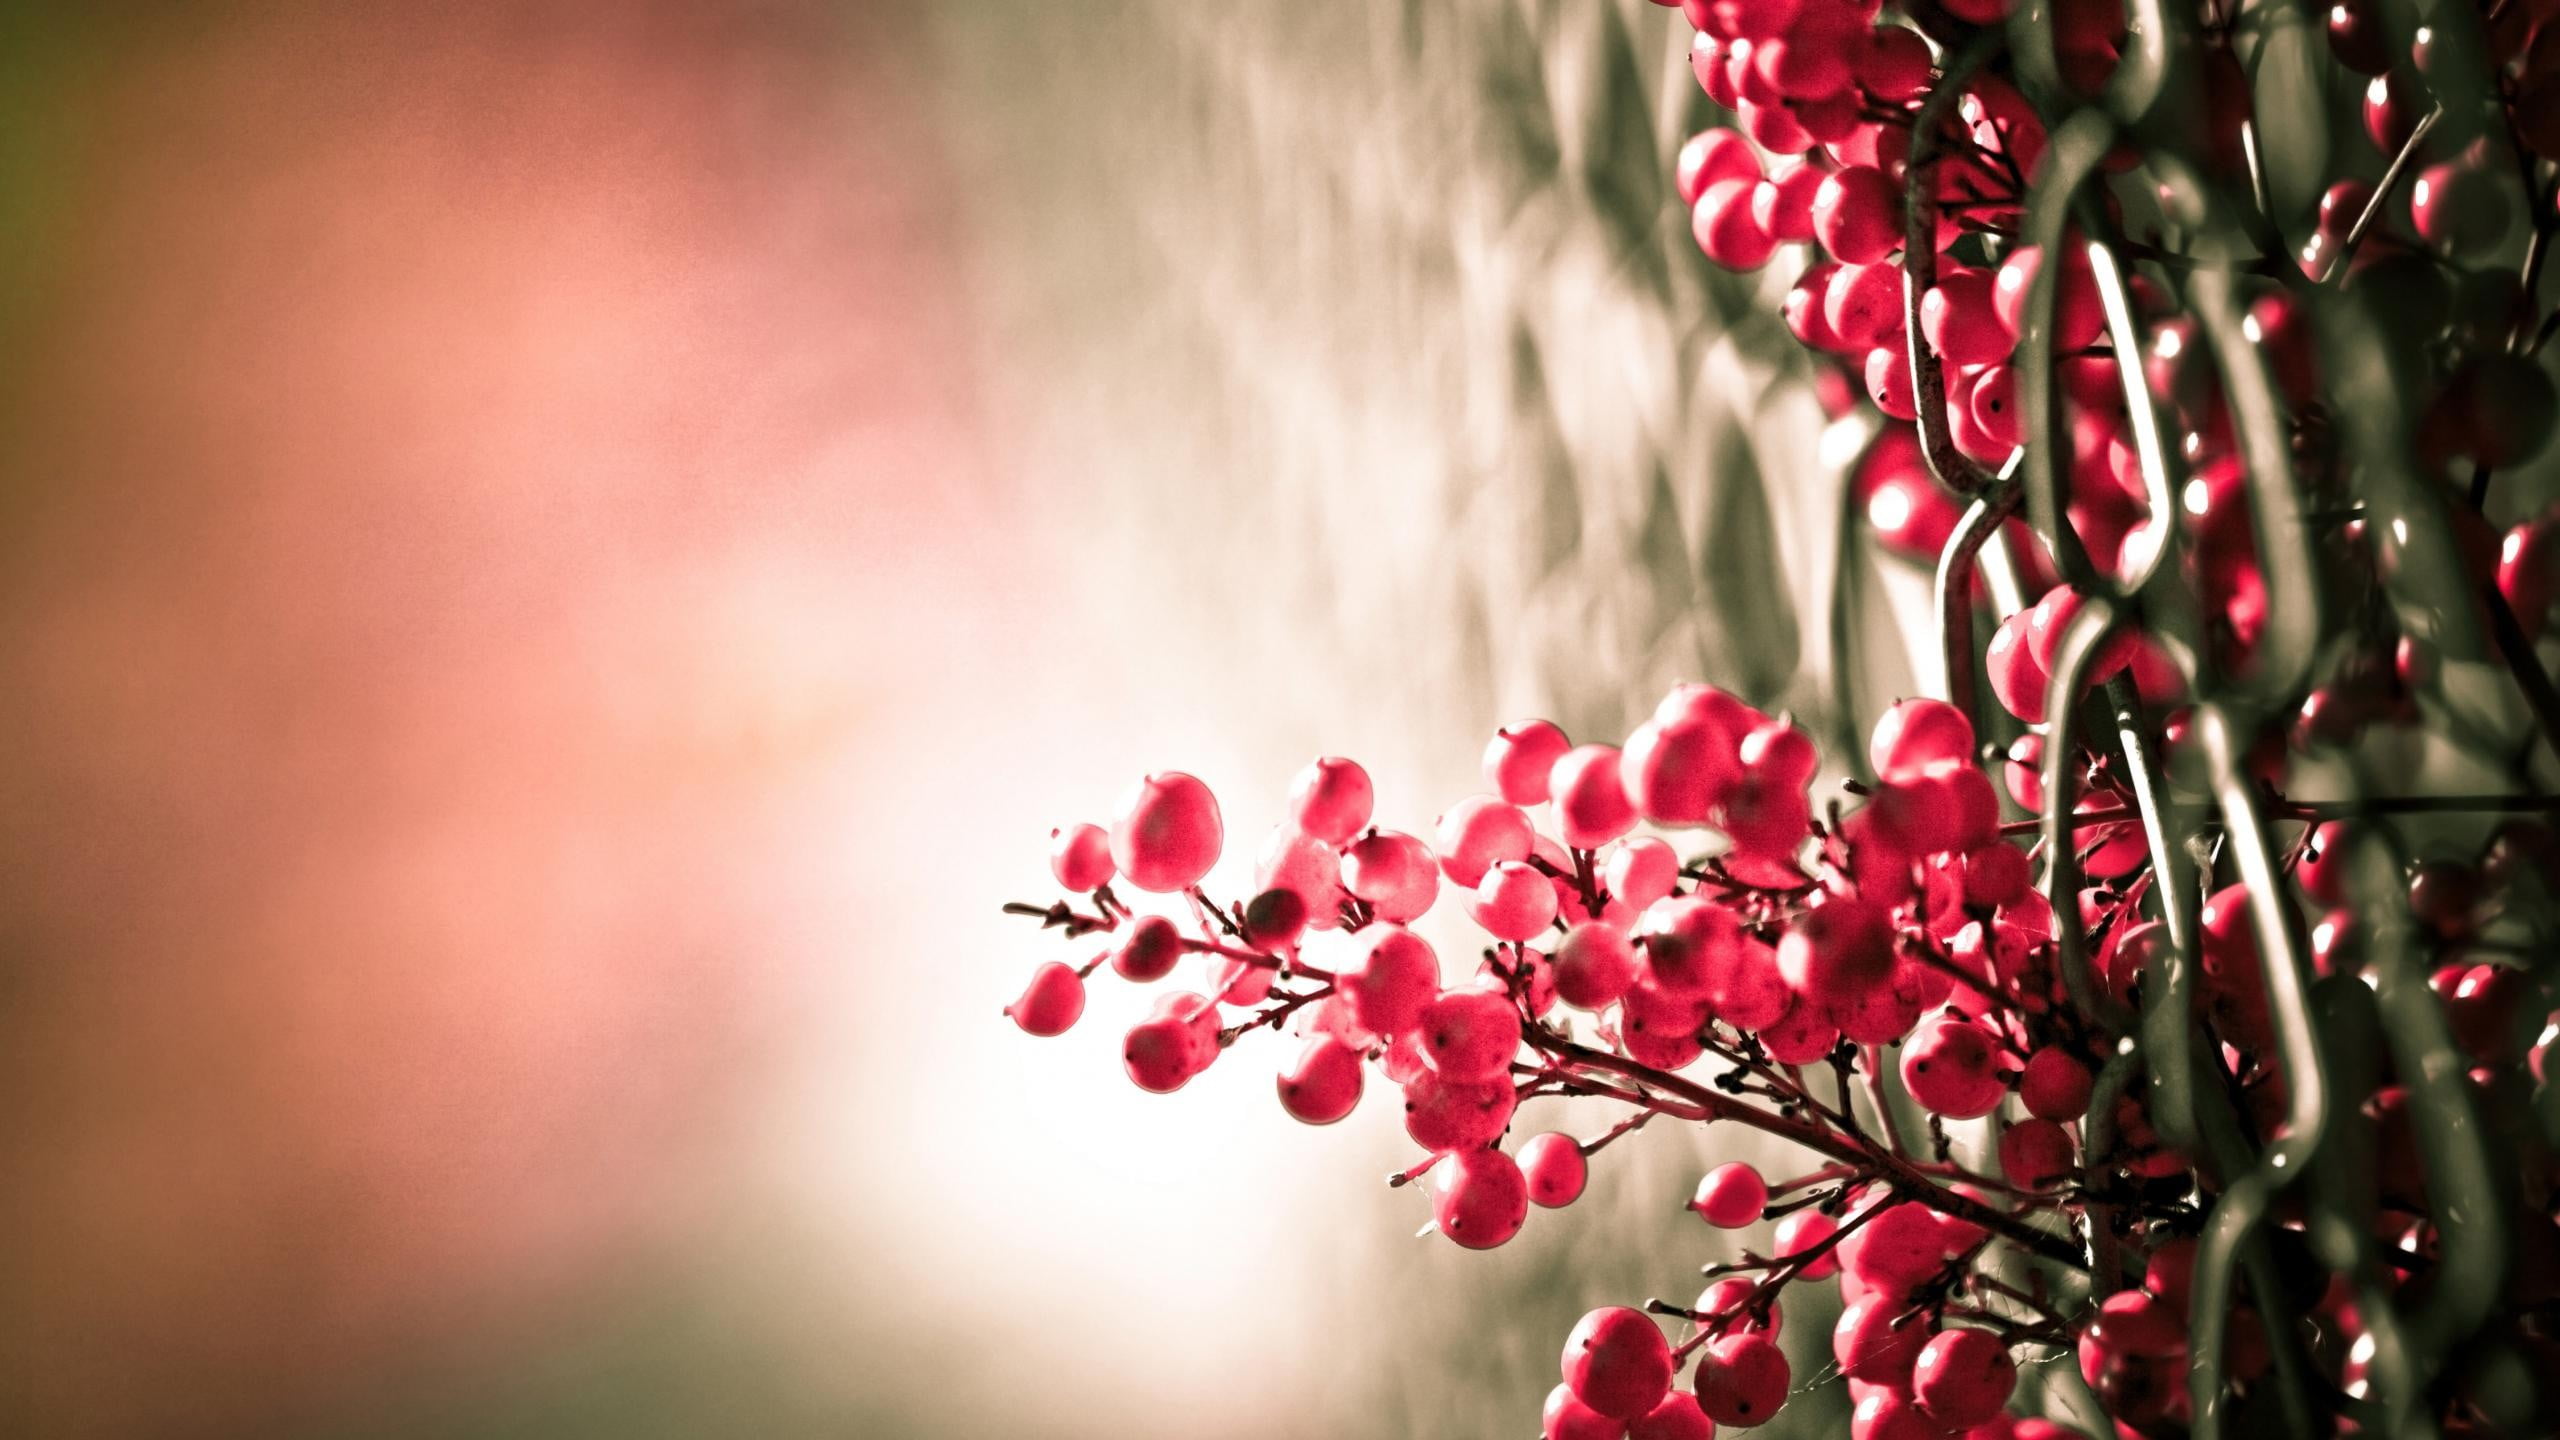 bunch of red berries, photography, nature, plants, flowers